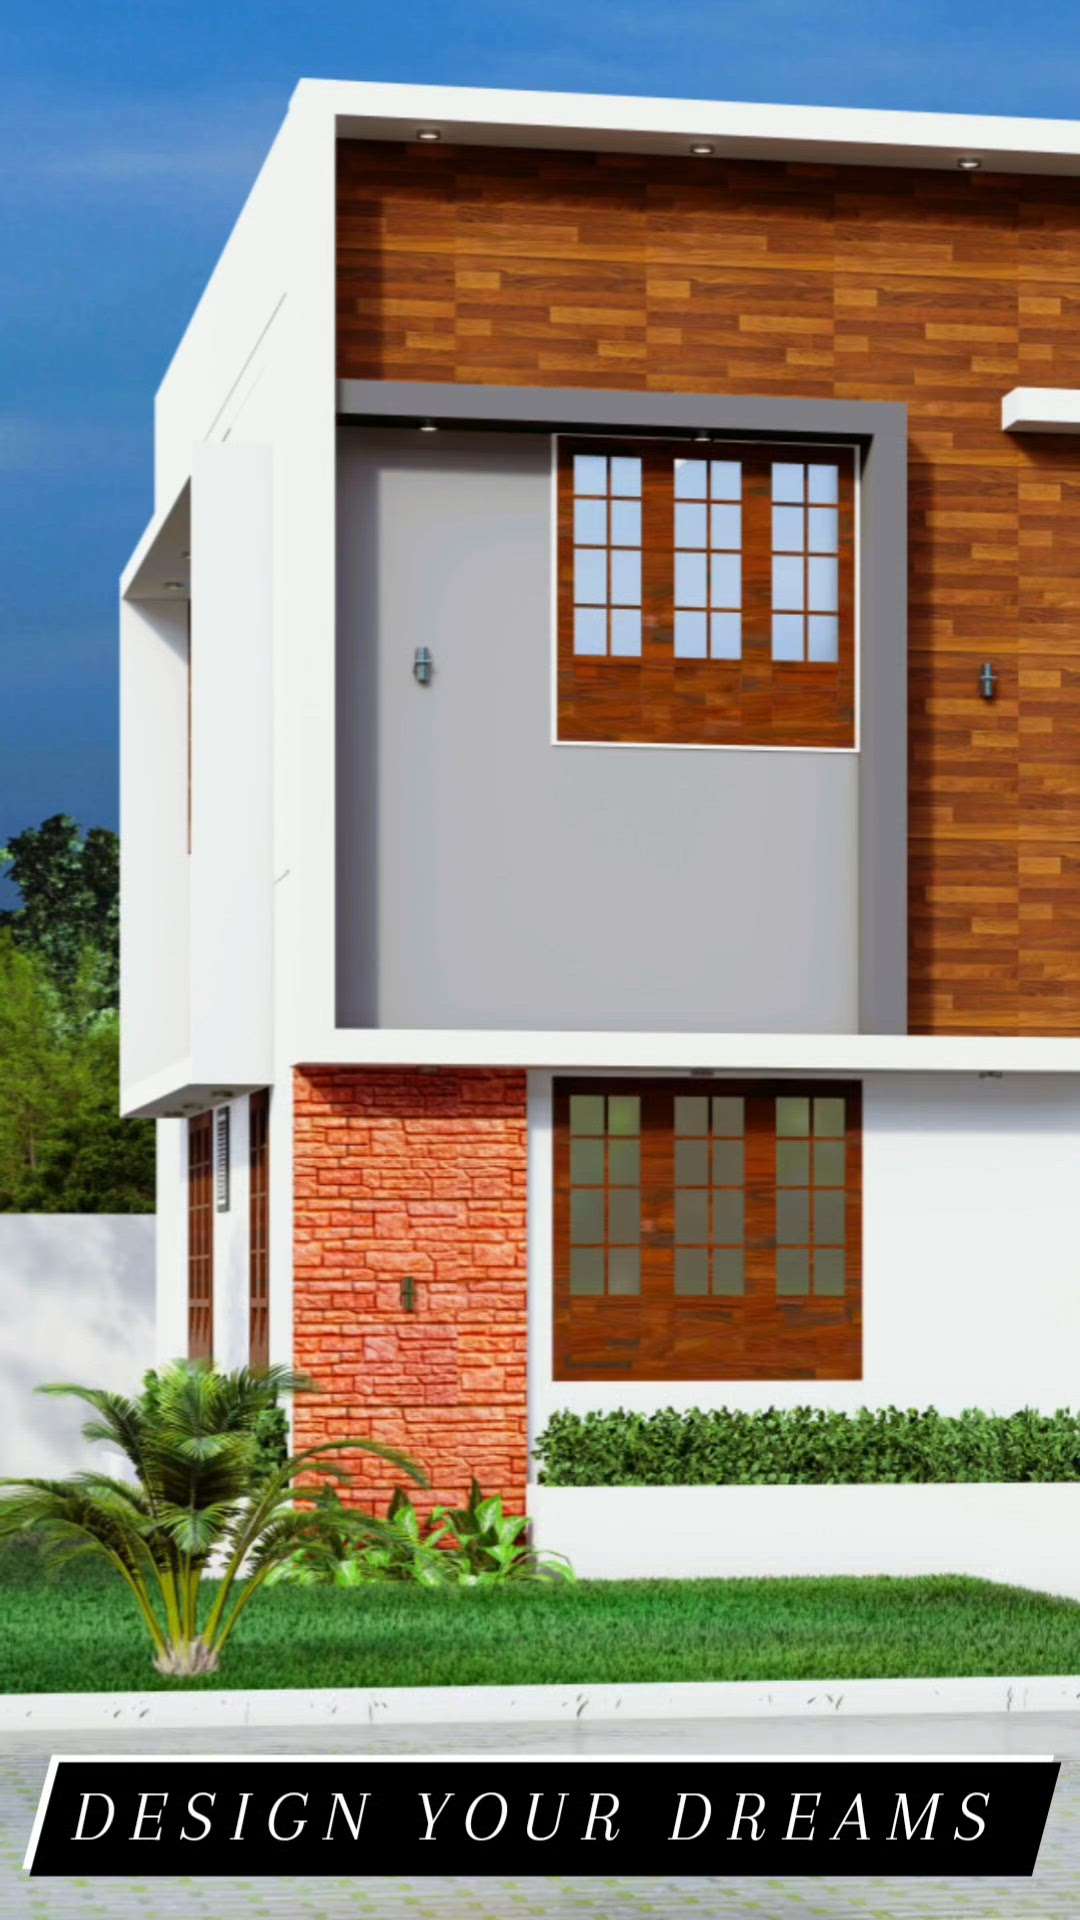 Elevation Model for Client at Trivandrum.
 #ElevationHome  #ElevationDesign  #exterior_Work  #exteriordesigns  #frontElevation  #3delevation🏠  #3Ddesigner  #architecturedesigns  #HouseDesigns  #tvm  #trivandram  #keralaplanners  #kerala  #ContemporaryHouse